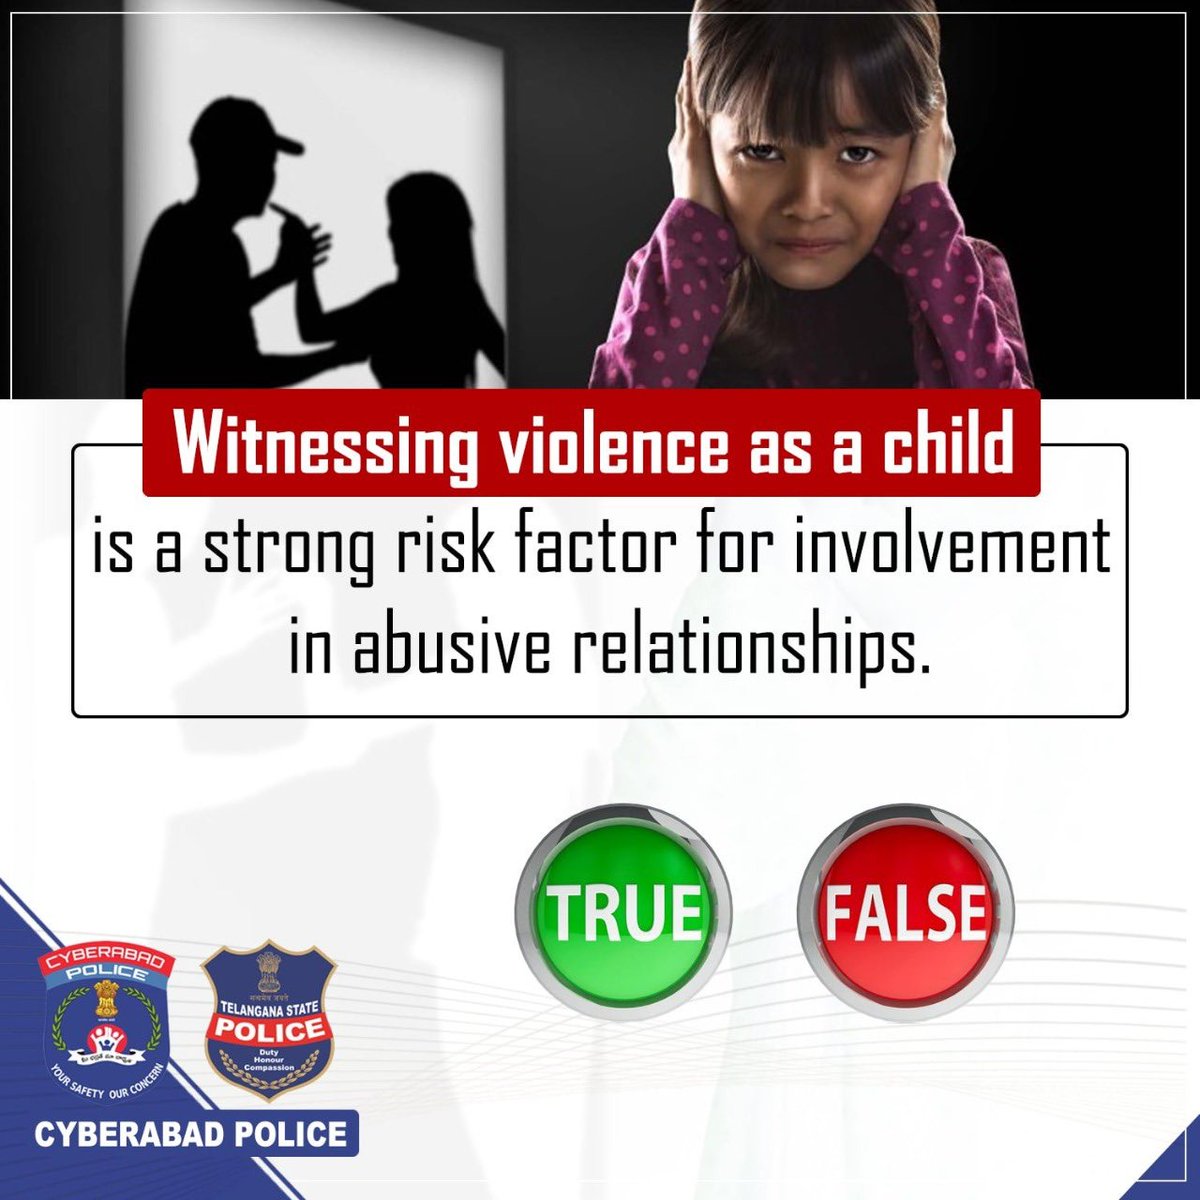 Witnessing violence as a child is a strong risk factor for involvement in abusive relationships. ° True ° False #CyberabadPolice #SayNoToDomesticViolence